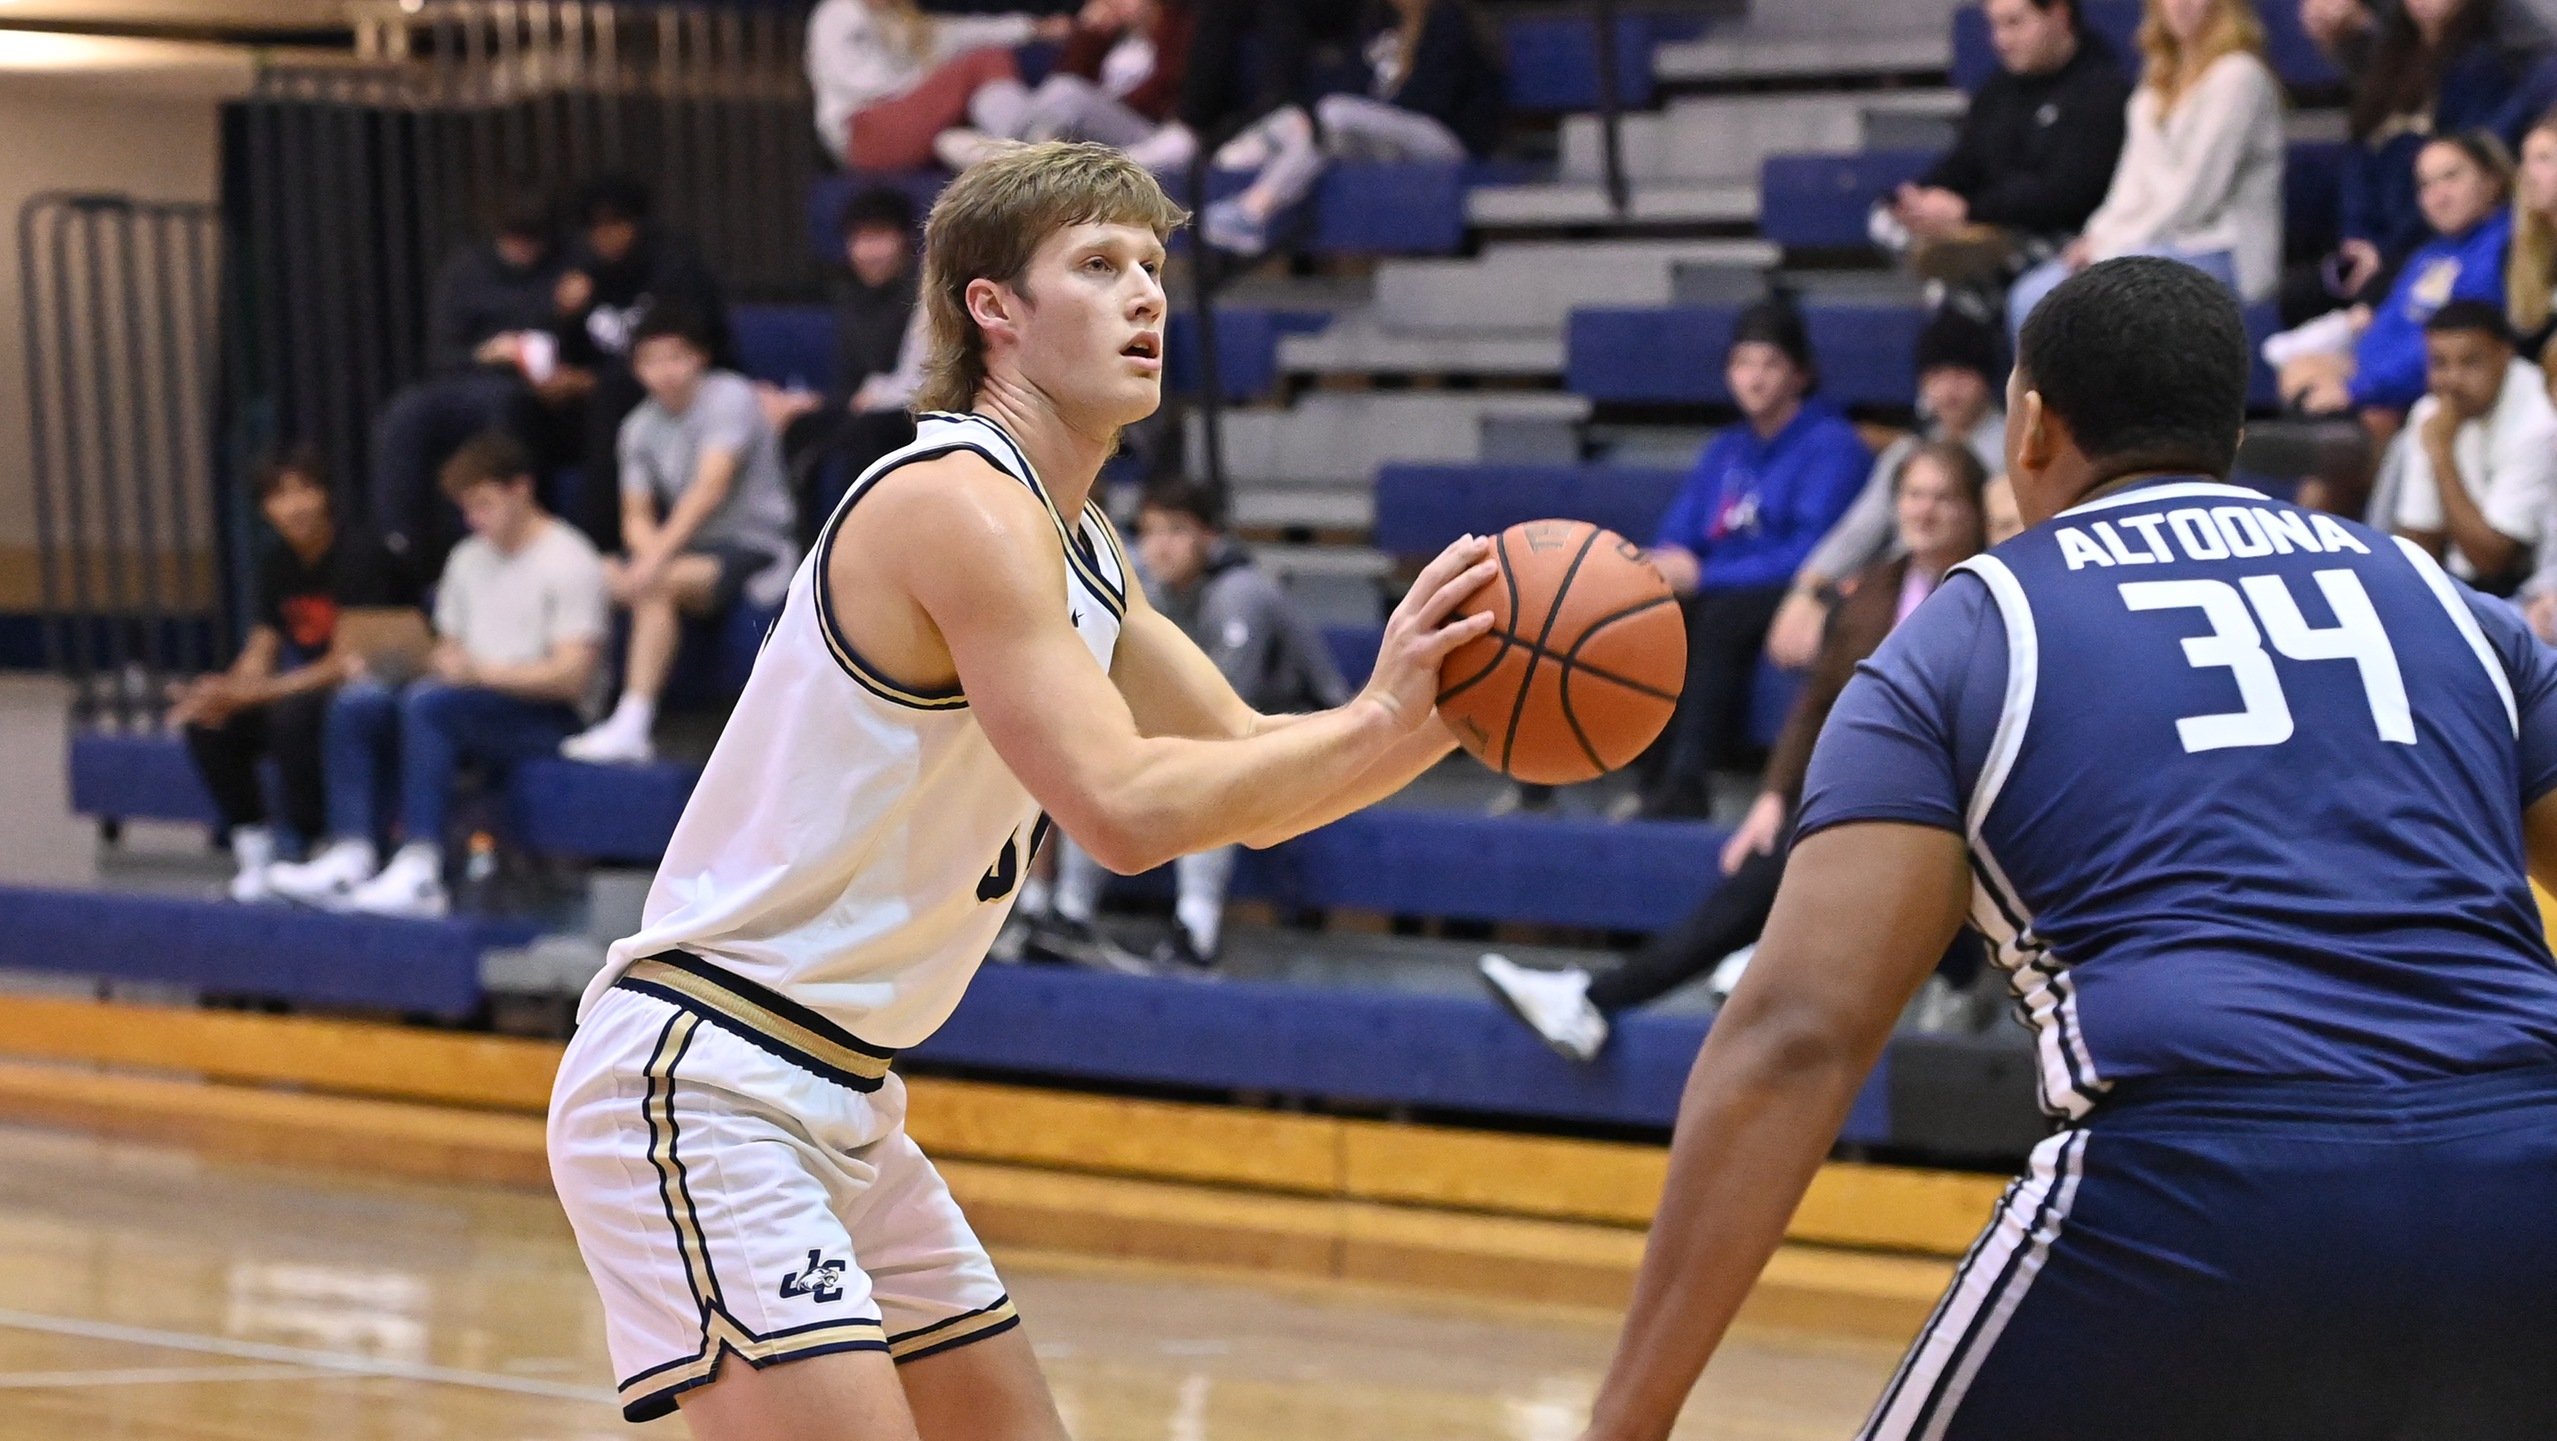 Husted Scores Career High 27 Points, Late Game Winner Against Dutchmen